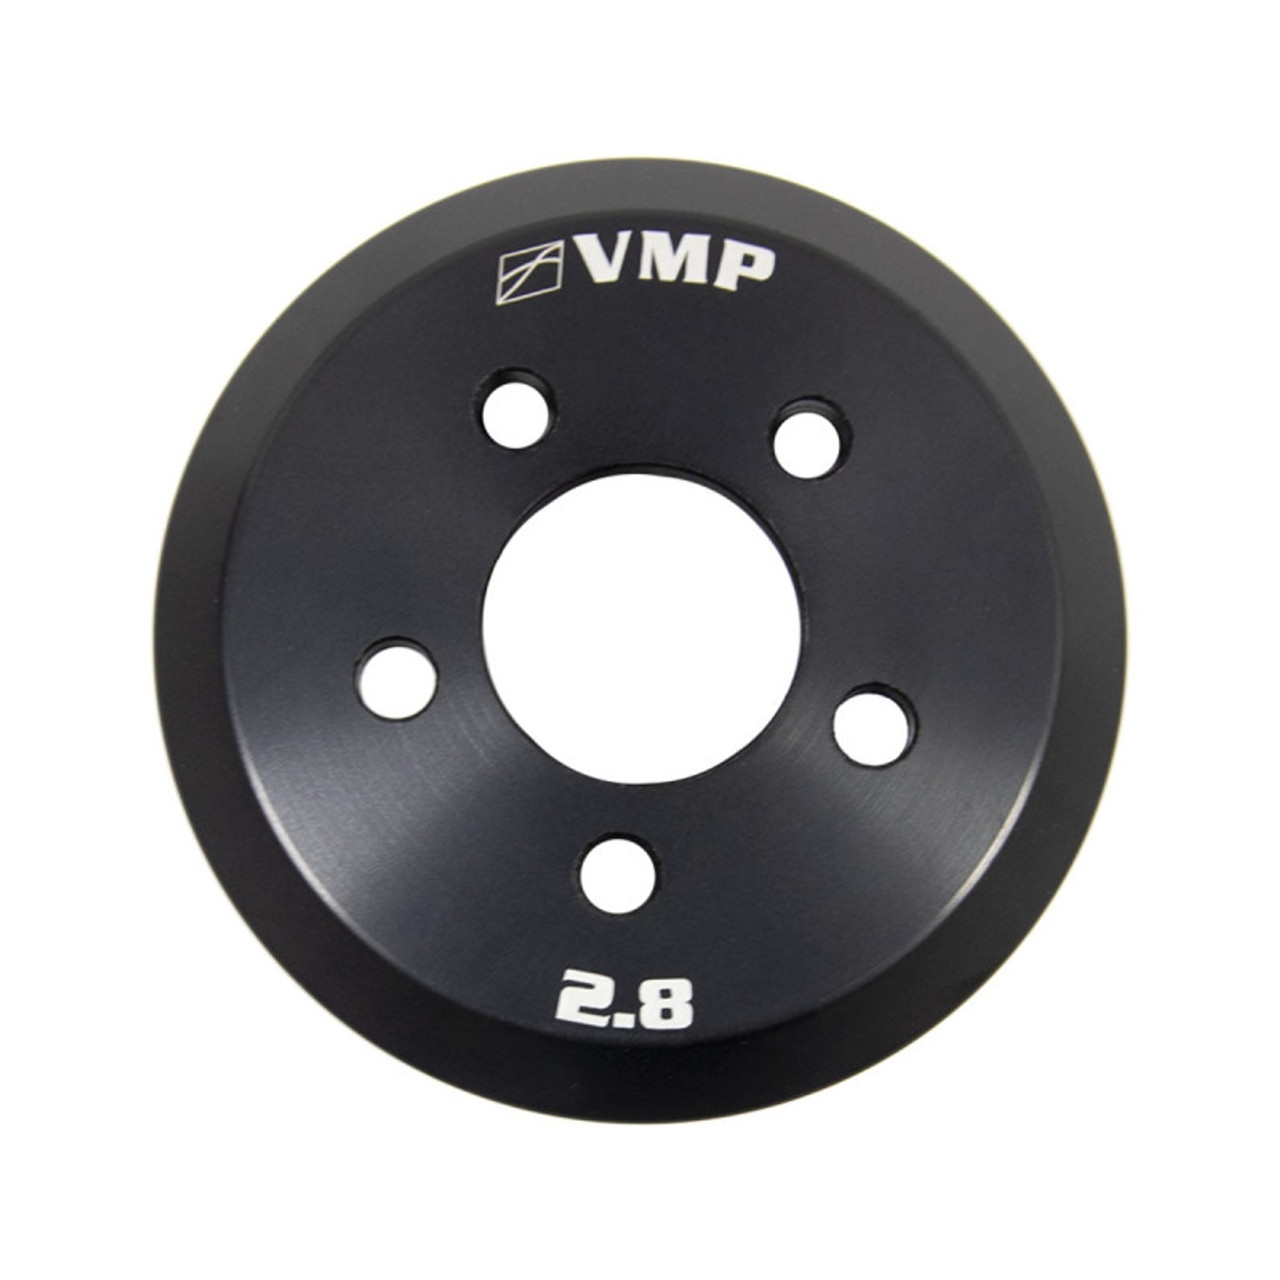 VMP Performance 2018+ Roush TVS Supercharger 2.8in 6-Rib Pulley - VMP-28-6-BR Photo - Primary